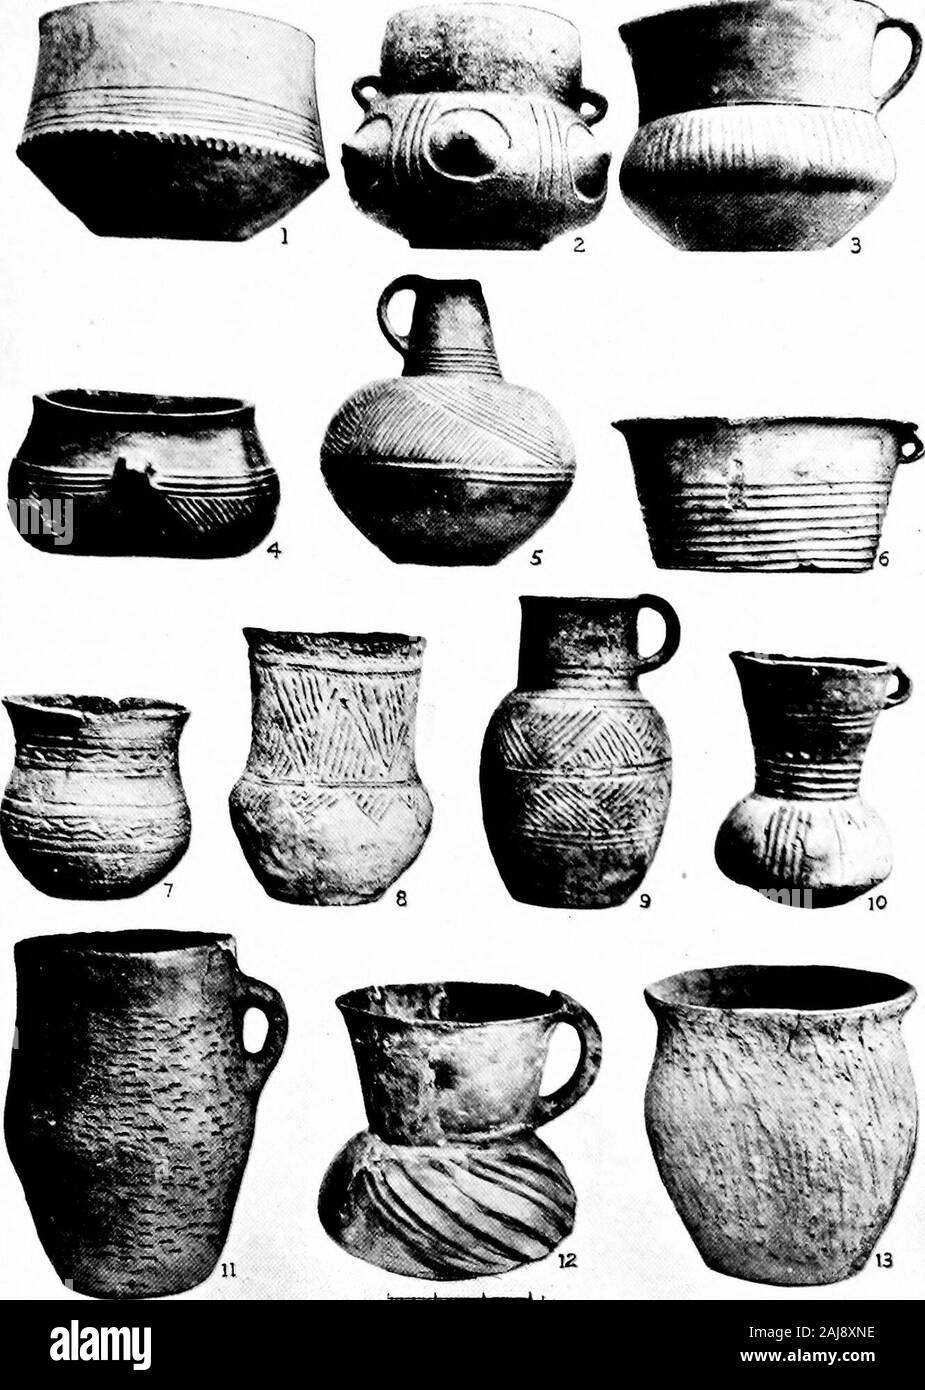 A guide to the antiquities of the bronze age in the Department of British and mediæval antiquities . anufacture. It is generally of a yellowcolour and of thin, well-baked ware, superior to that found in thiscountry. The collection was made by Dr. Klemm of Dresden,and is derived from various sites in Saxony and Lower Lausitz. Two groujis of urn-fields dating from the Bronze age are dis-tinguished in this .area, and of these the first is characterised byvases with conical bases [Buckel-urnen, plate vi, 2); by oval-bodiedvases with spreading lip (13); and by a doubly conical form, theupper part d Stock Photo